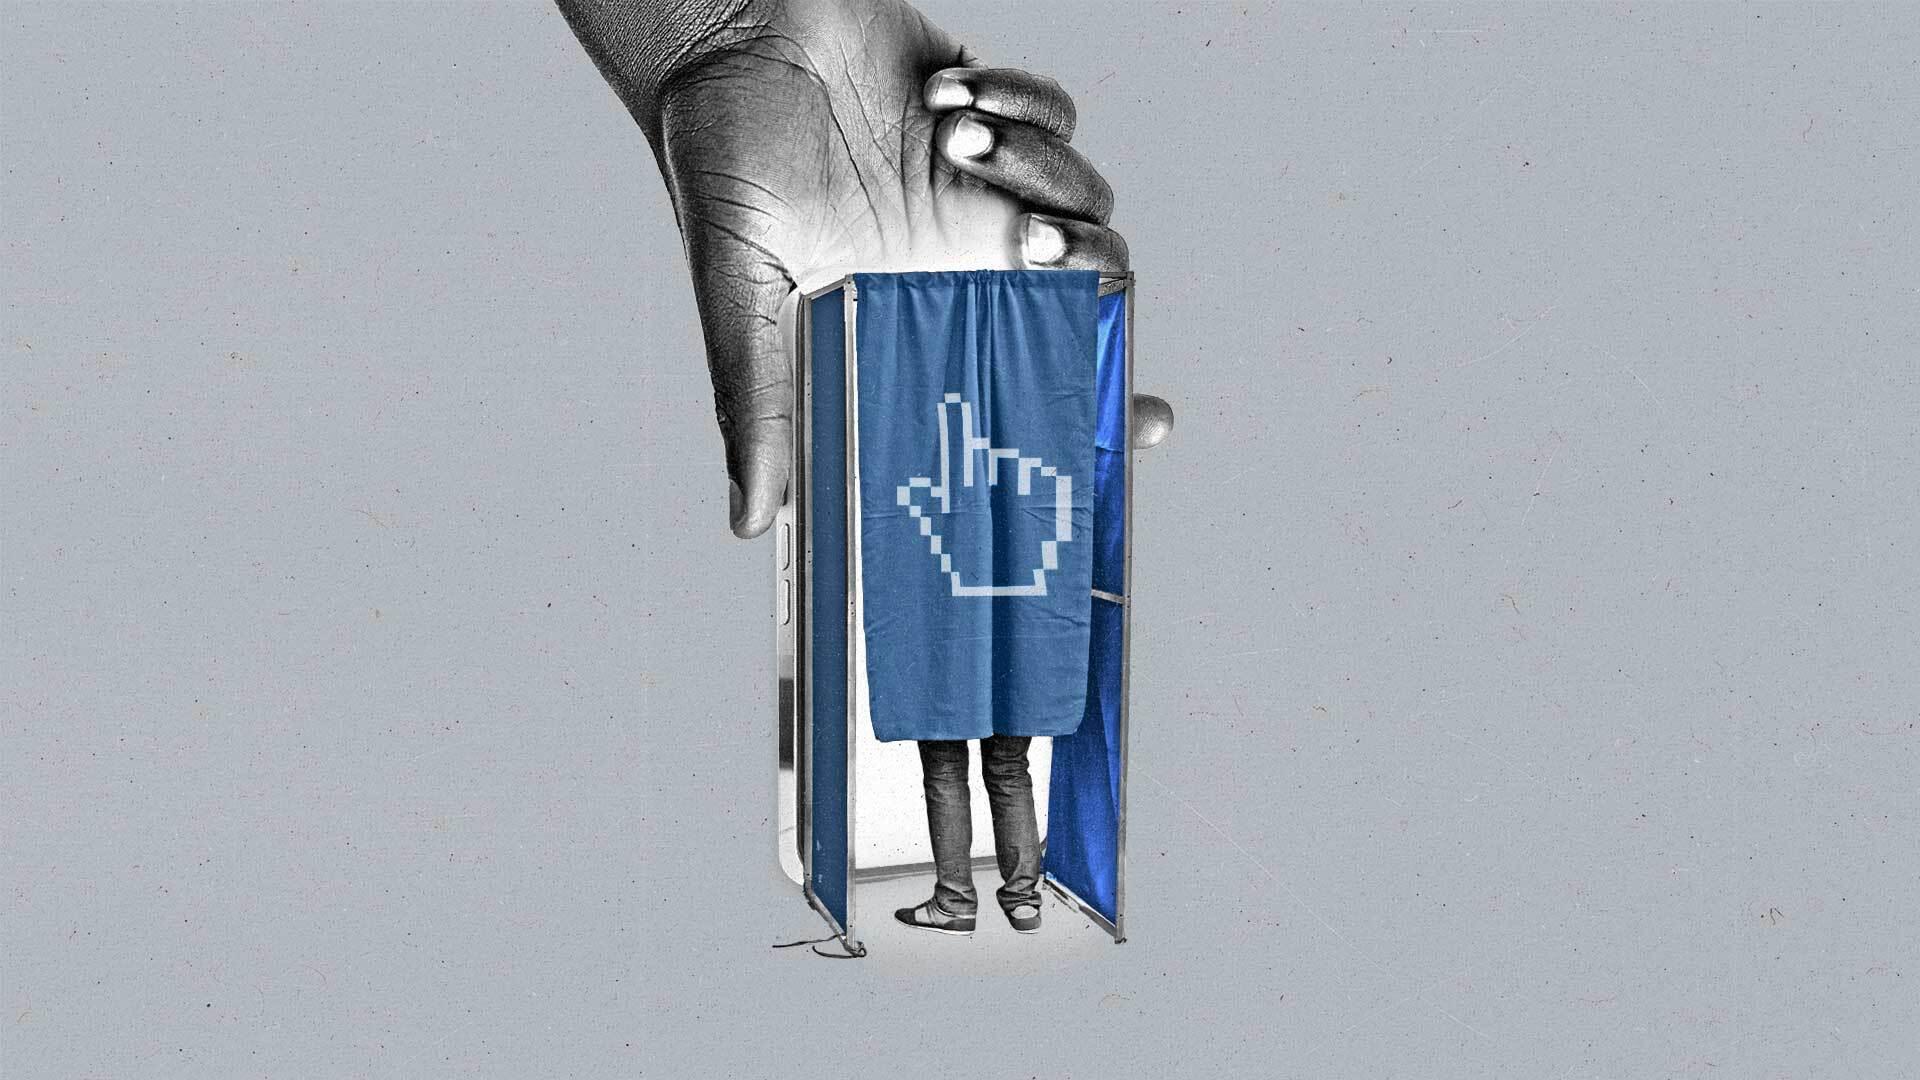 A hand holds a bright smartphone with a voting booth attached while a man votes inside.